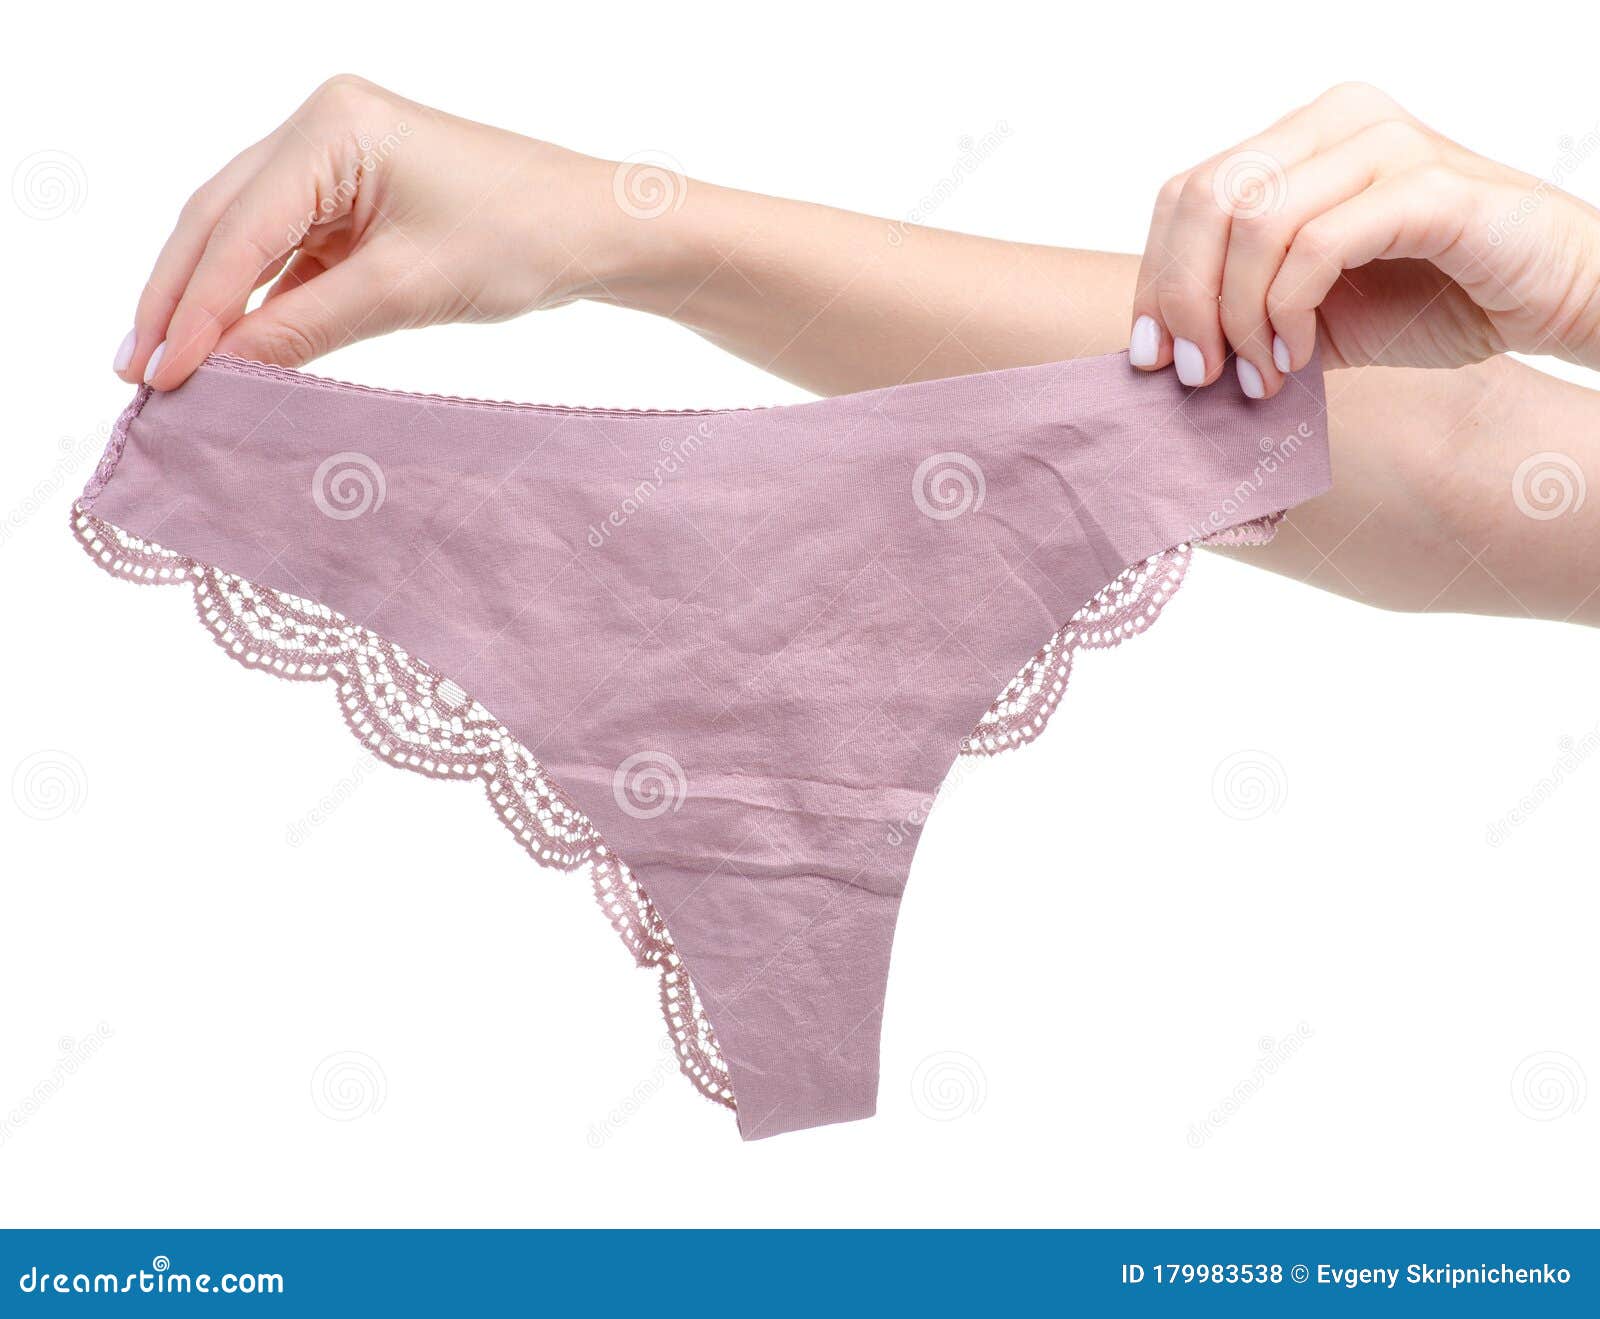 Female Pink Lace Panties in Hand Stock Photo - Image of cute, beautiful ...